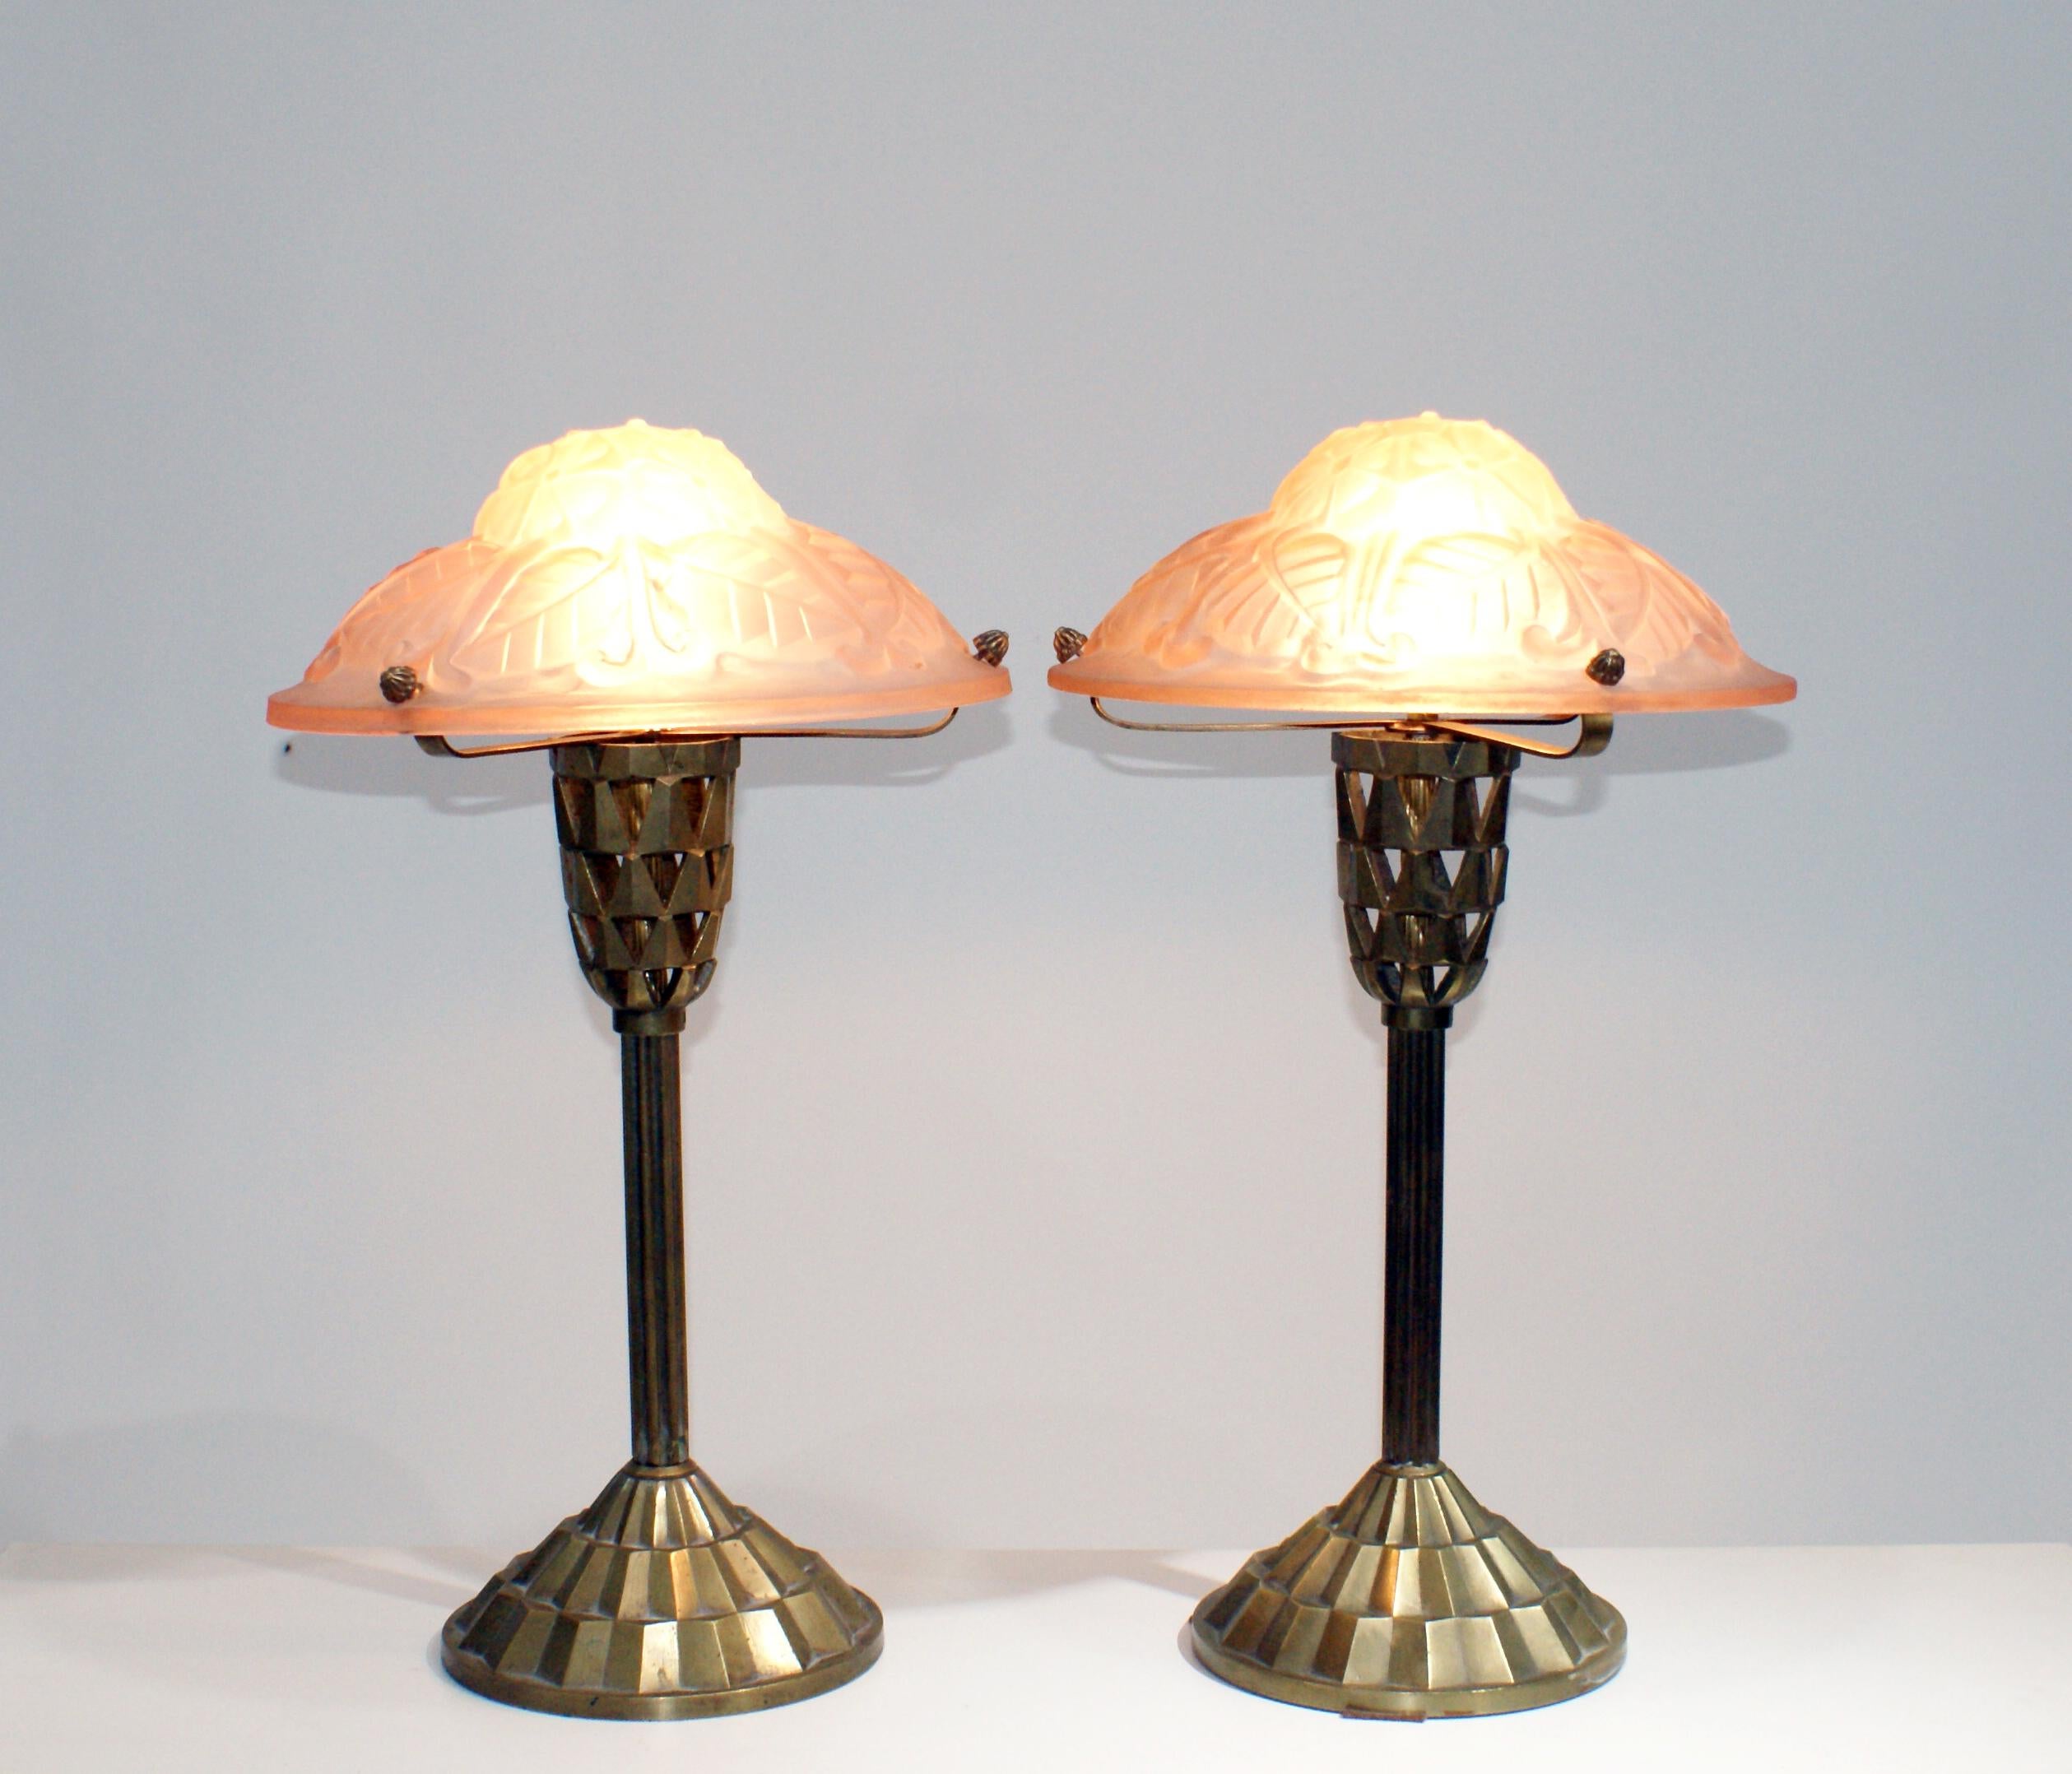 Charming pair of Art Deco table lamp, high quality pink molded glass panel with rare original floral and leaves motif design in relief included “Degué” signature on the glass, resting on bronze brass column with detailed geometric design in relief